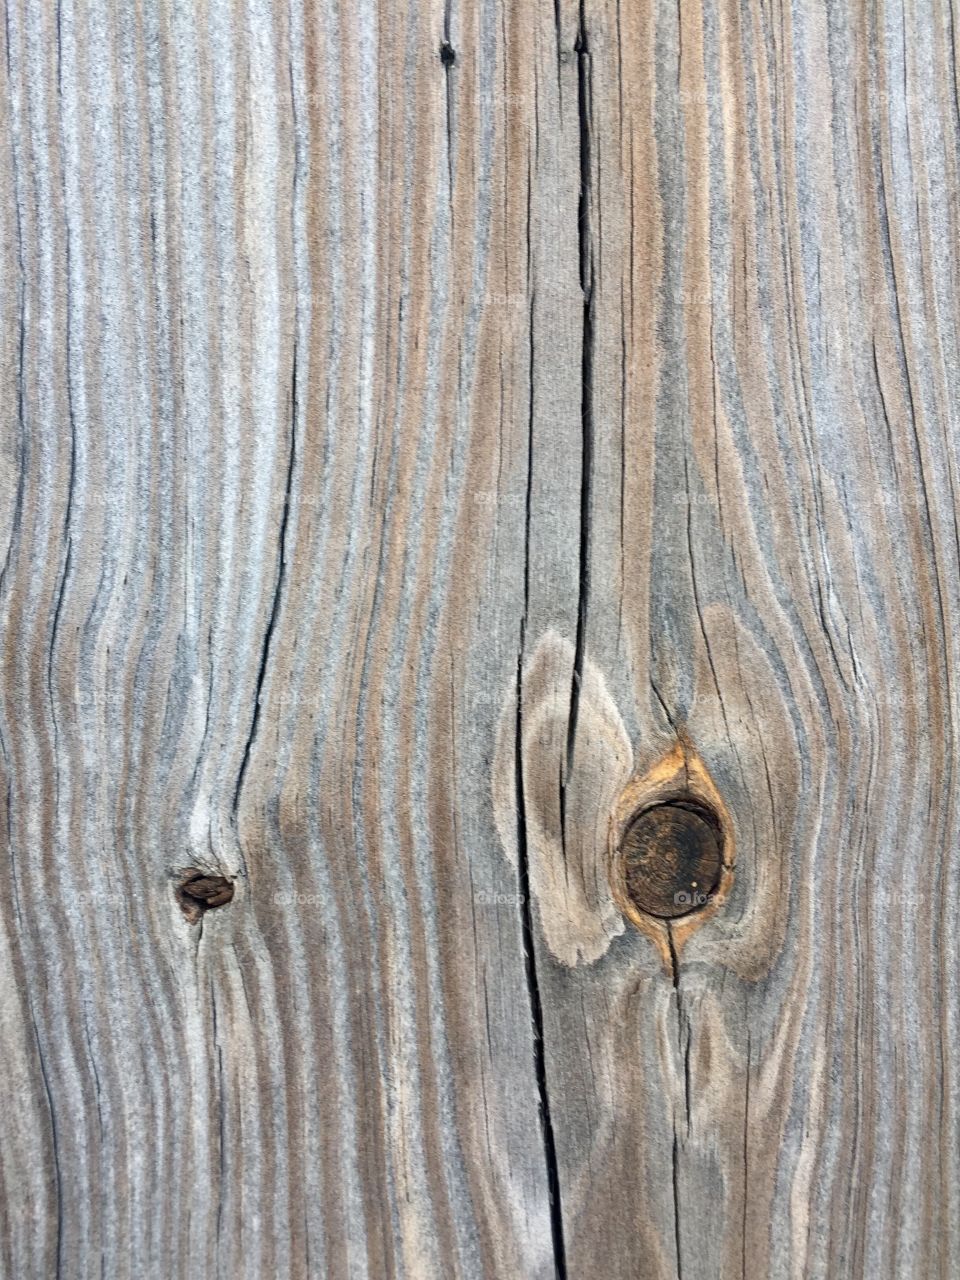 Weathered wood surface showing woodgrain texture detail with knots